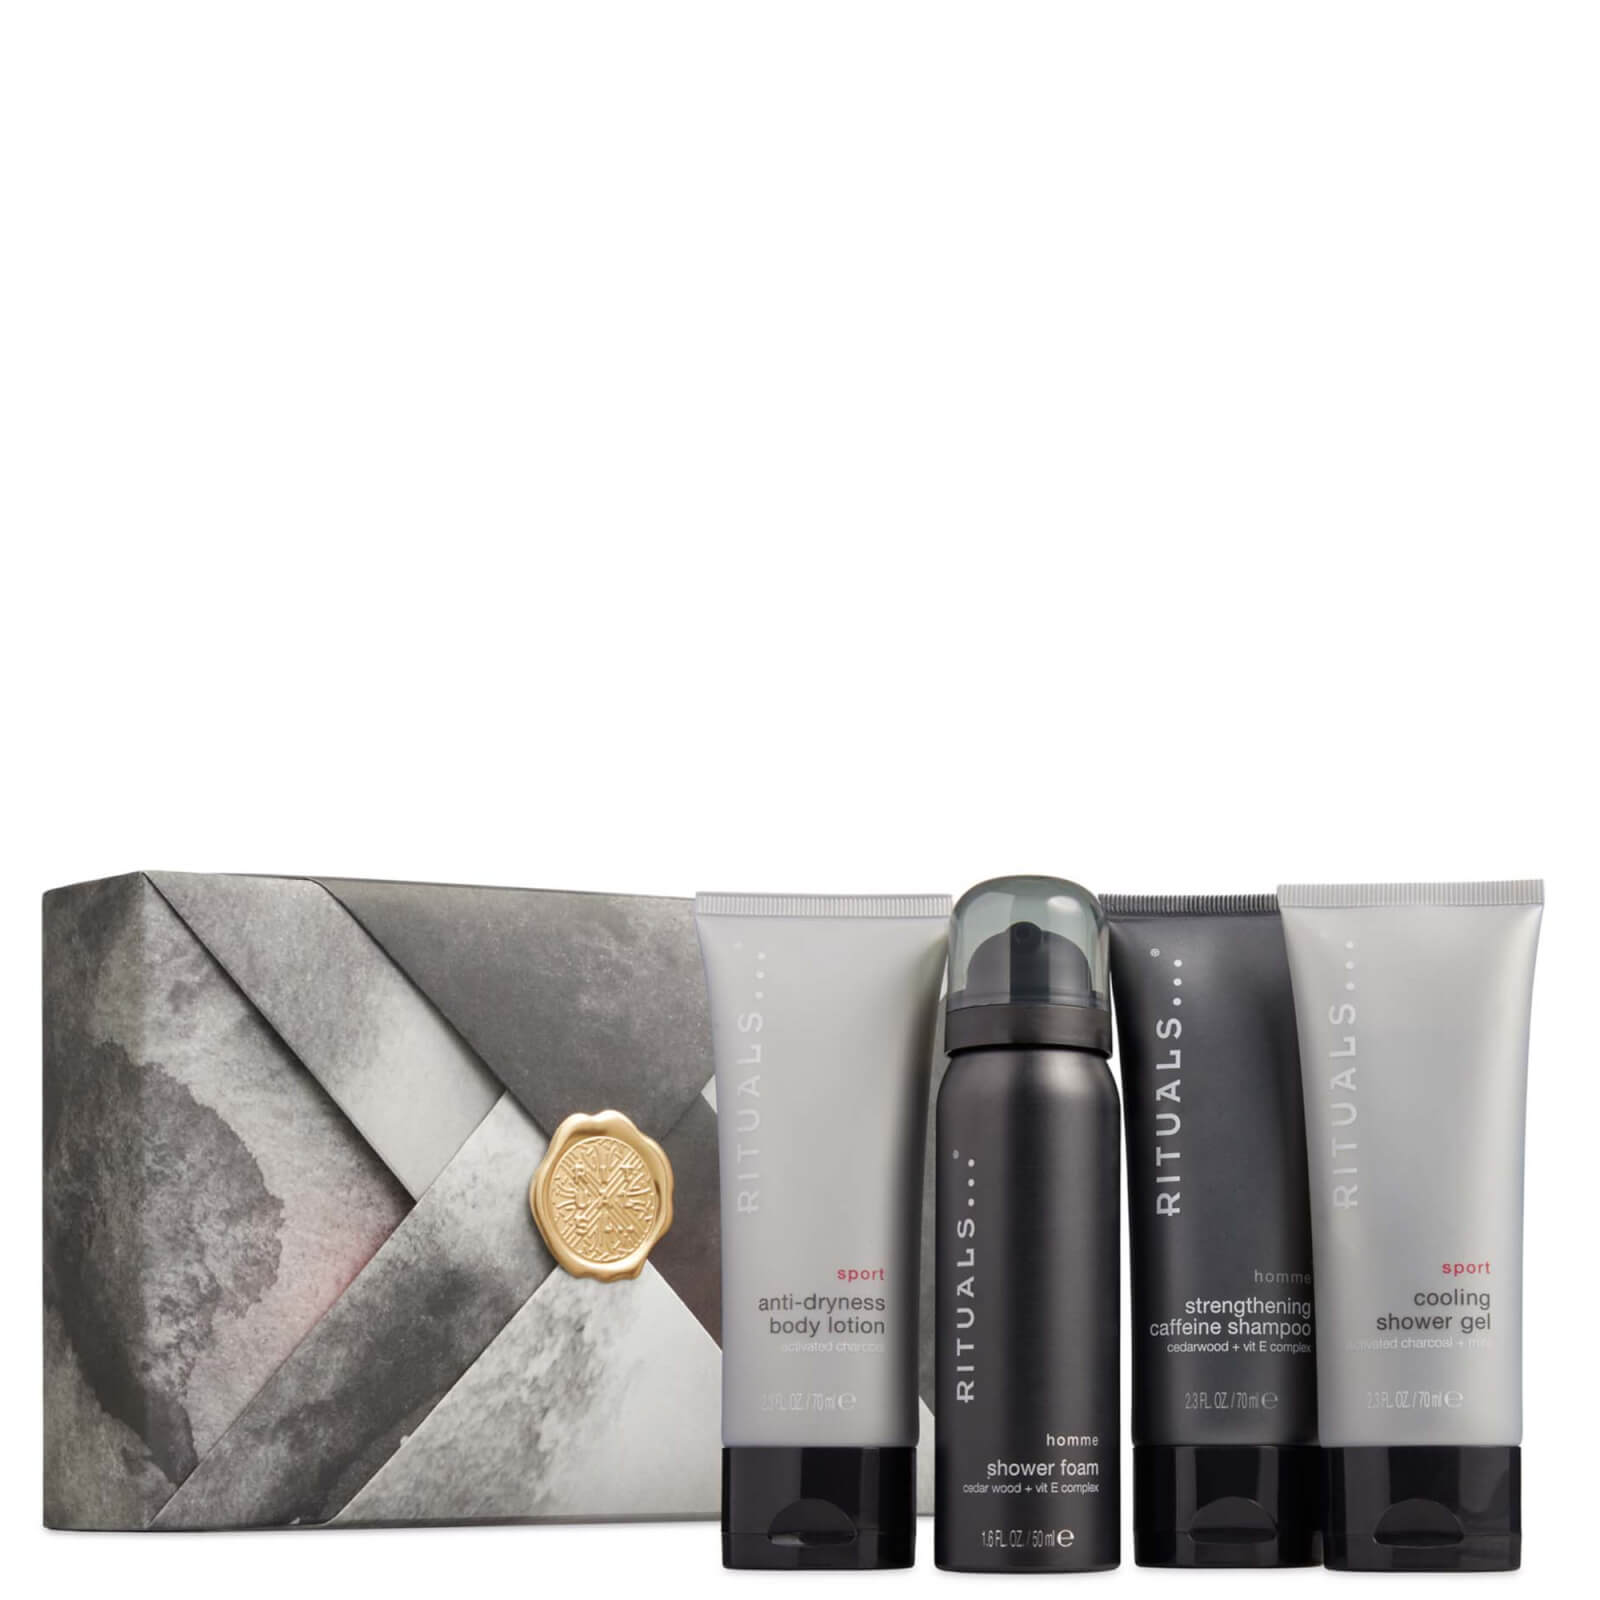 Rituals Core Gift Sets - Homme - Small (Worth £30.70)